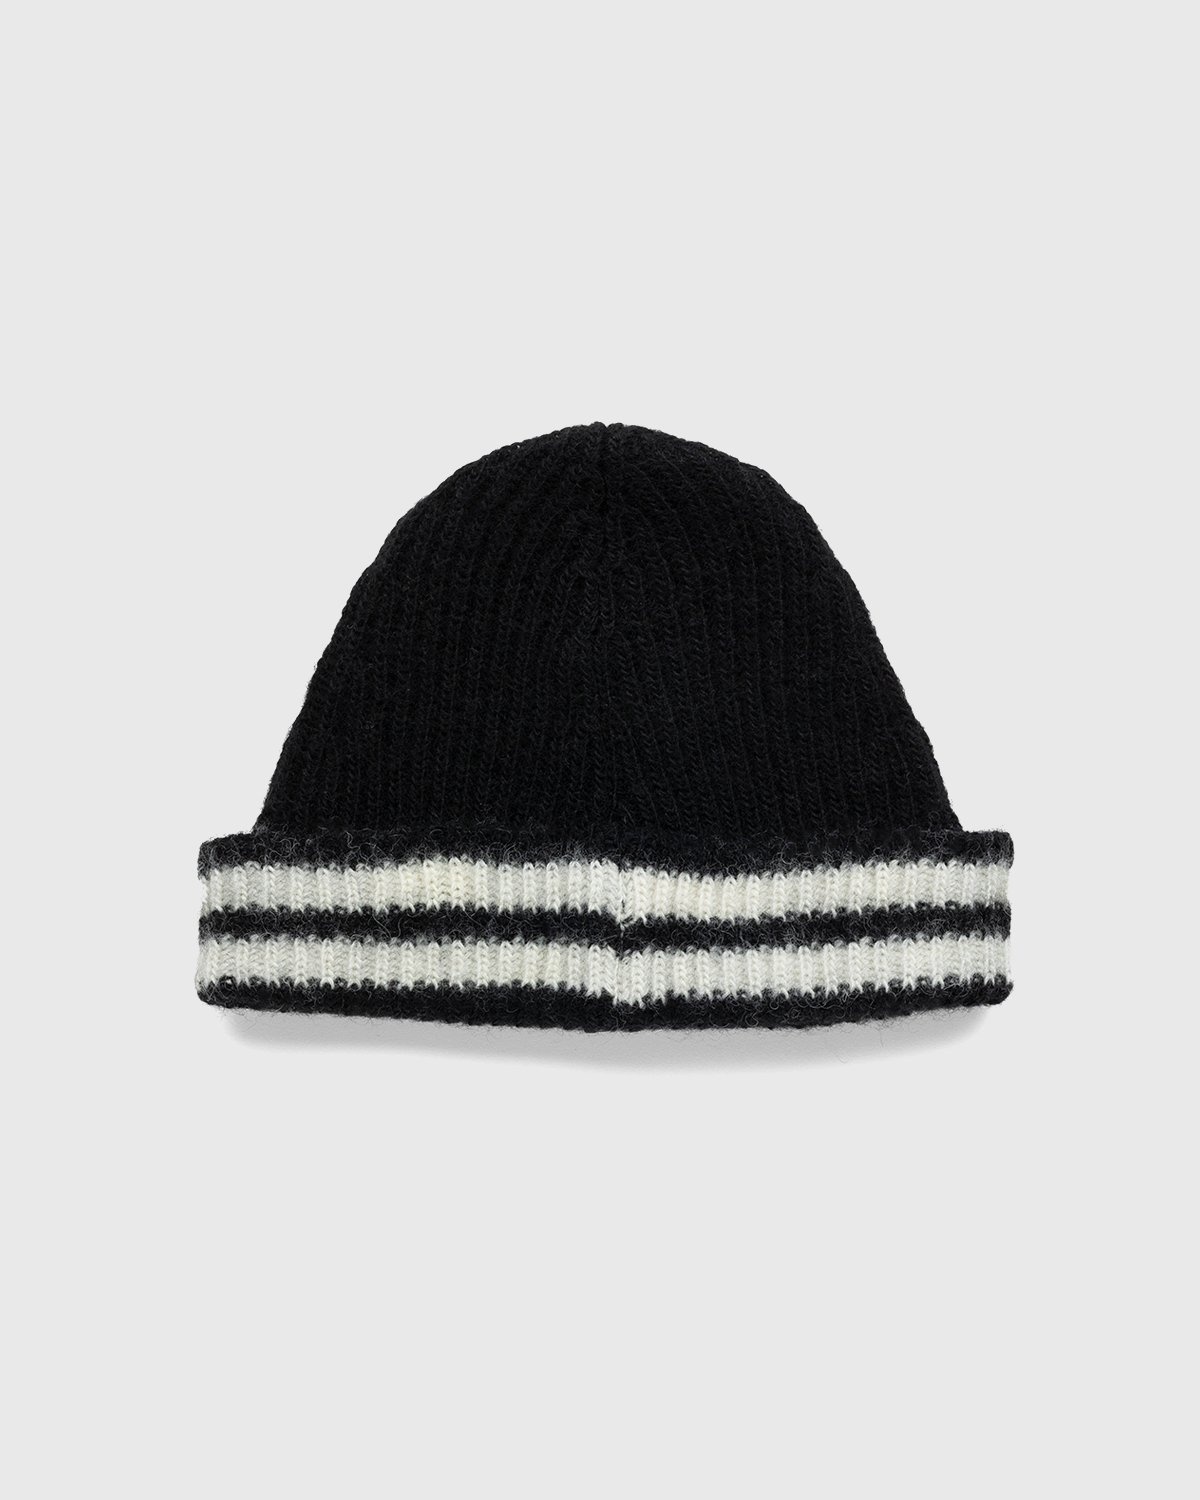 Our Legacy – Knitted Stripe Hat Black Ivory Wool - Beanies - Black - Image 2